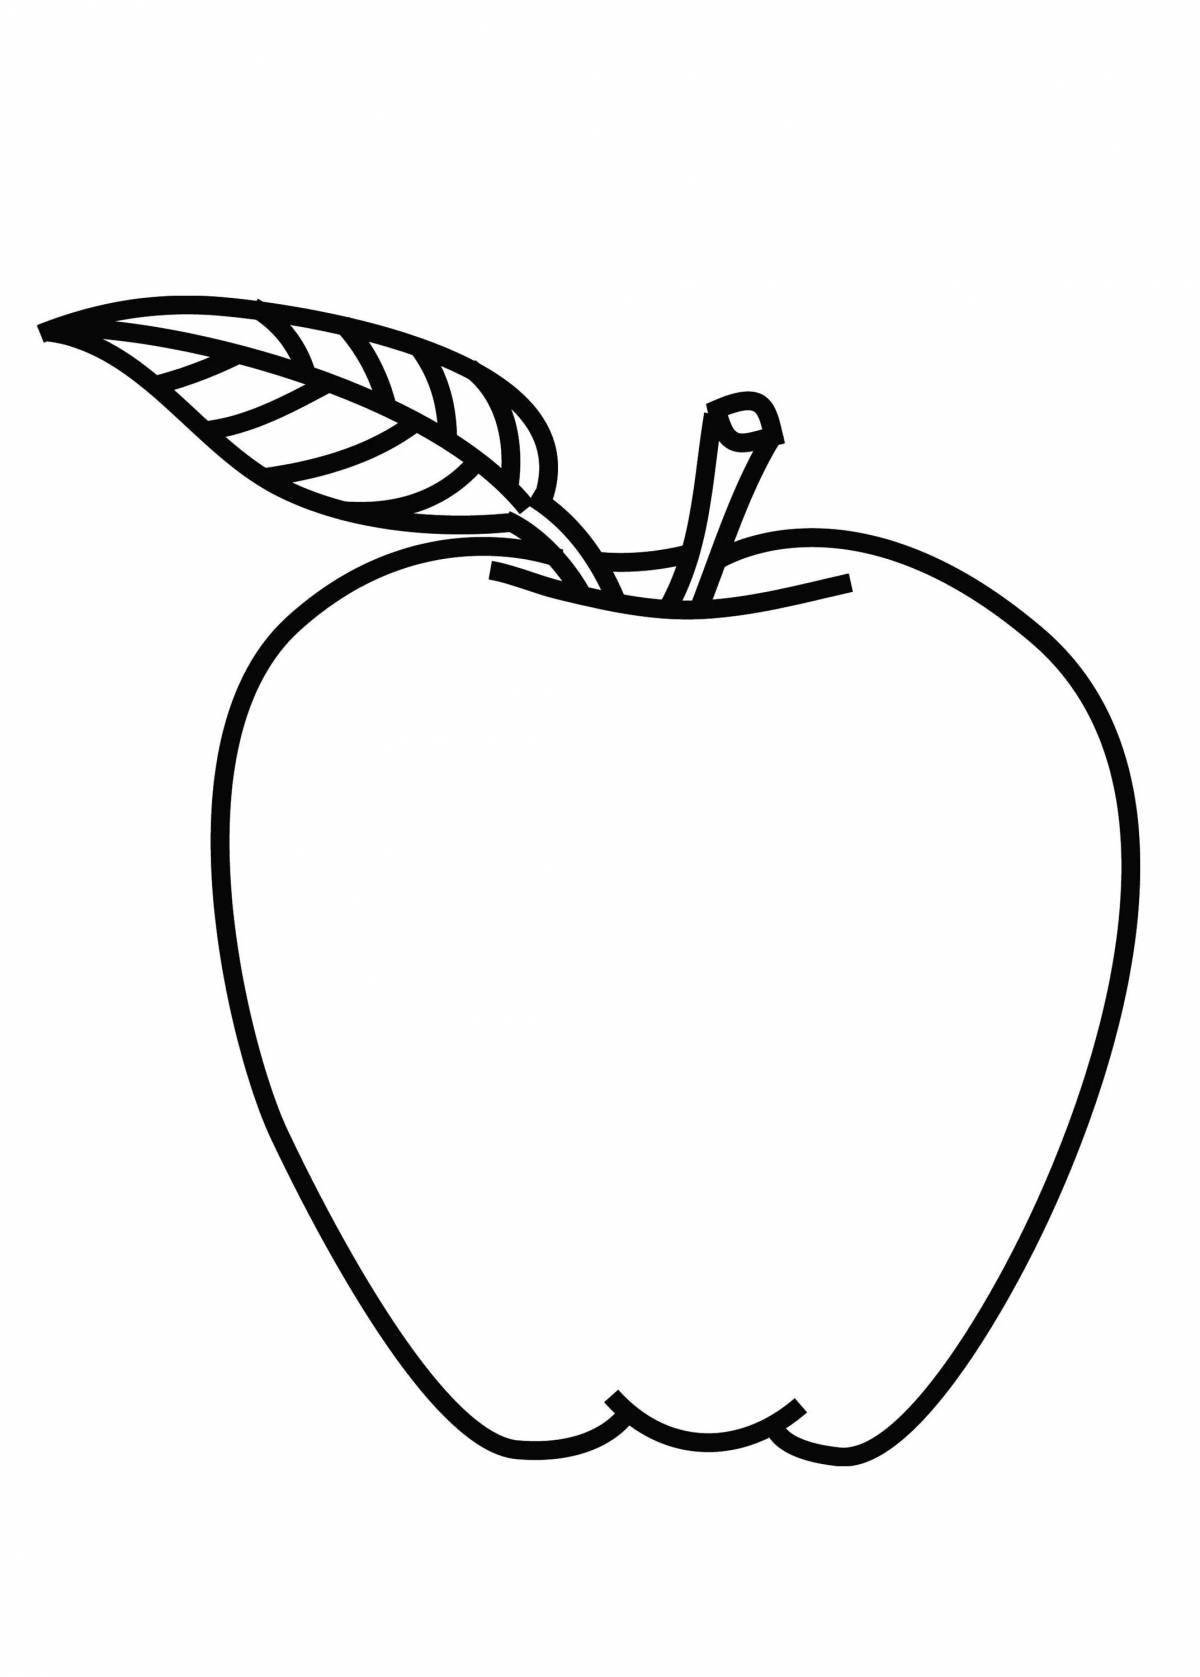 Great drawing of an apple